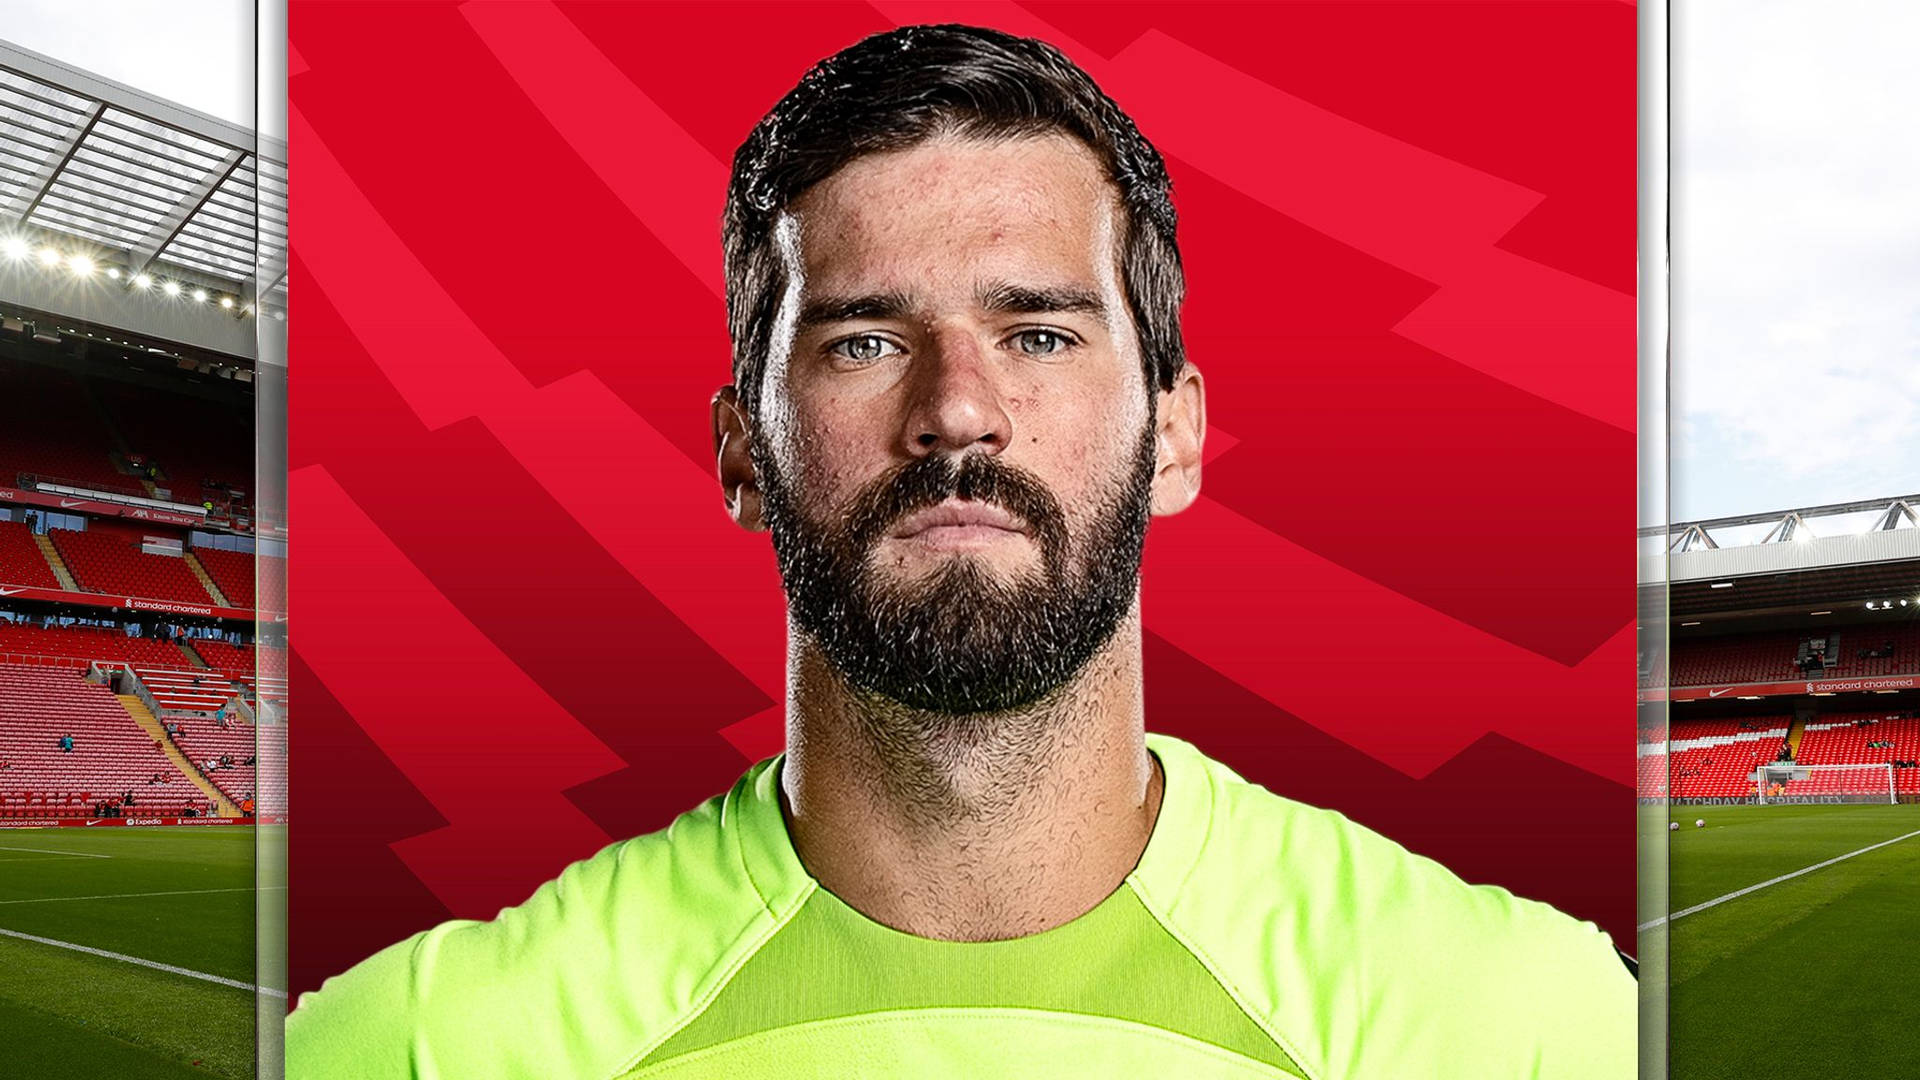 Top 999+ Alisson Becker Wallpaper Full HD, 4K✅Free to Use